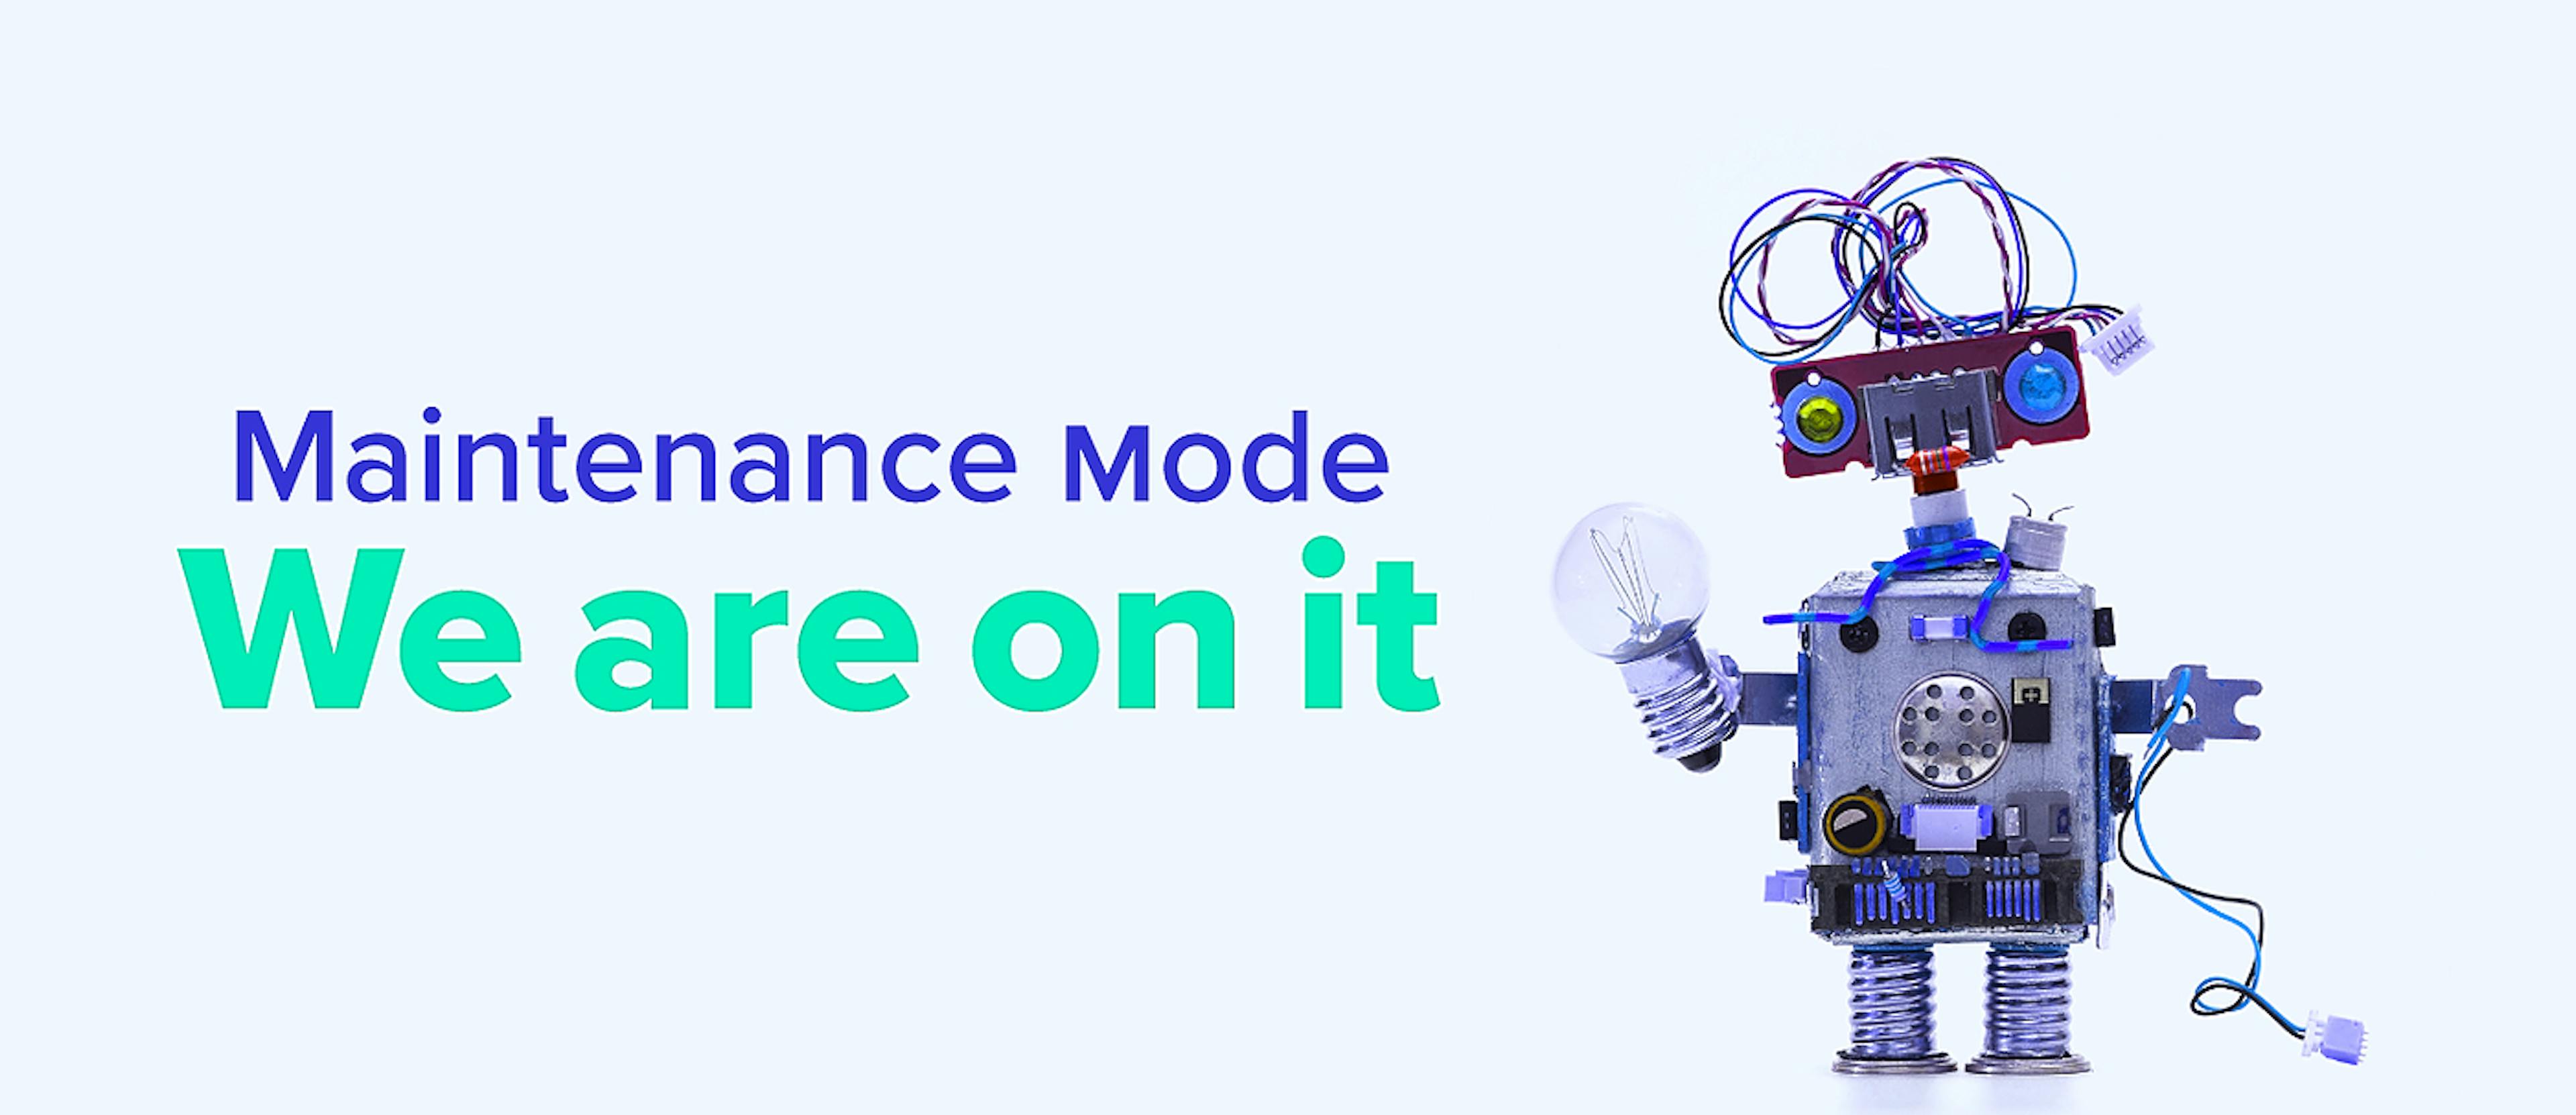 featured image - Building a “Maintenance Mode” with Terraform and Github Pages